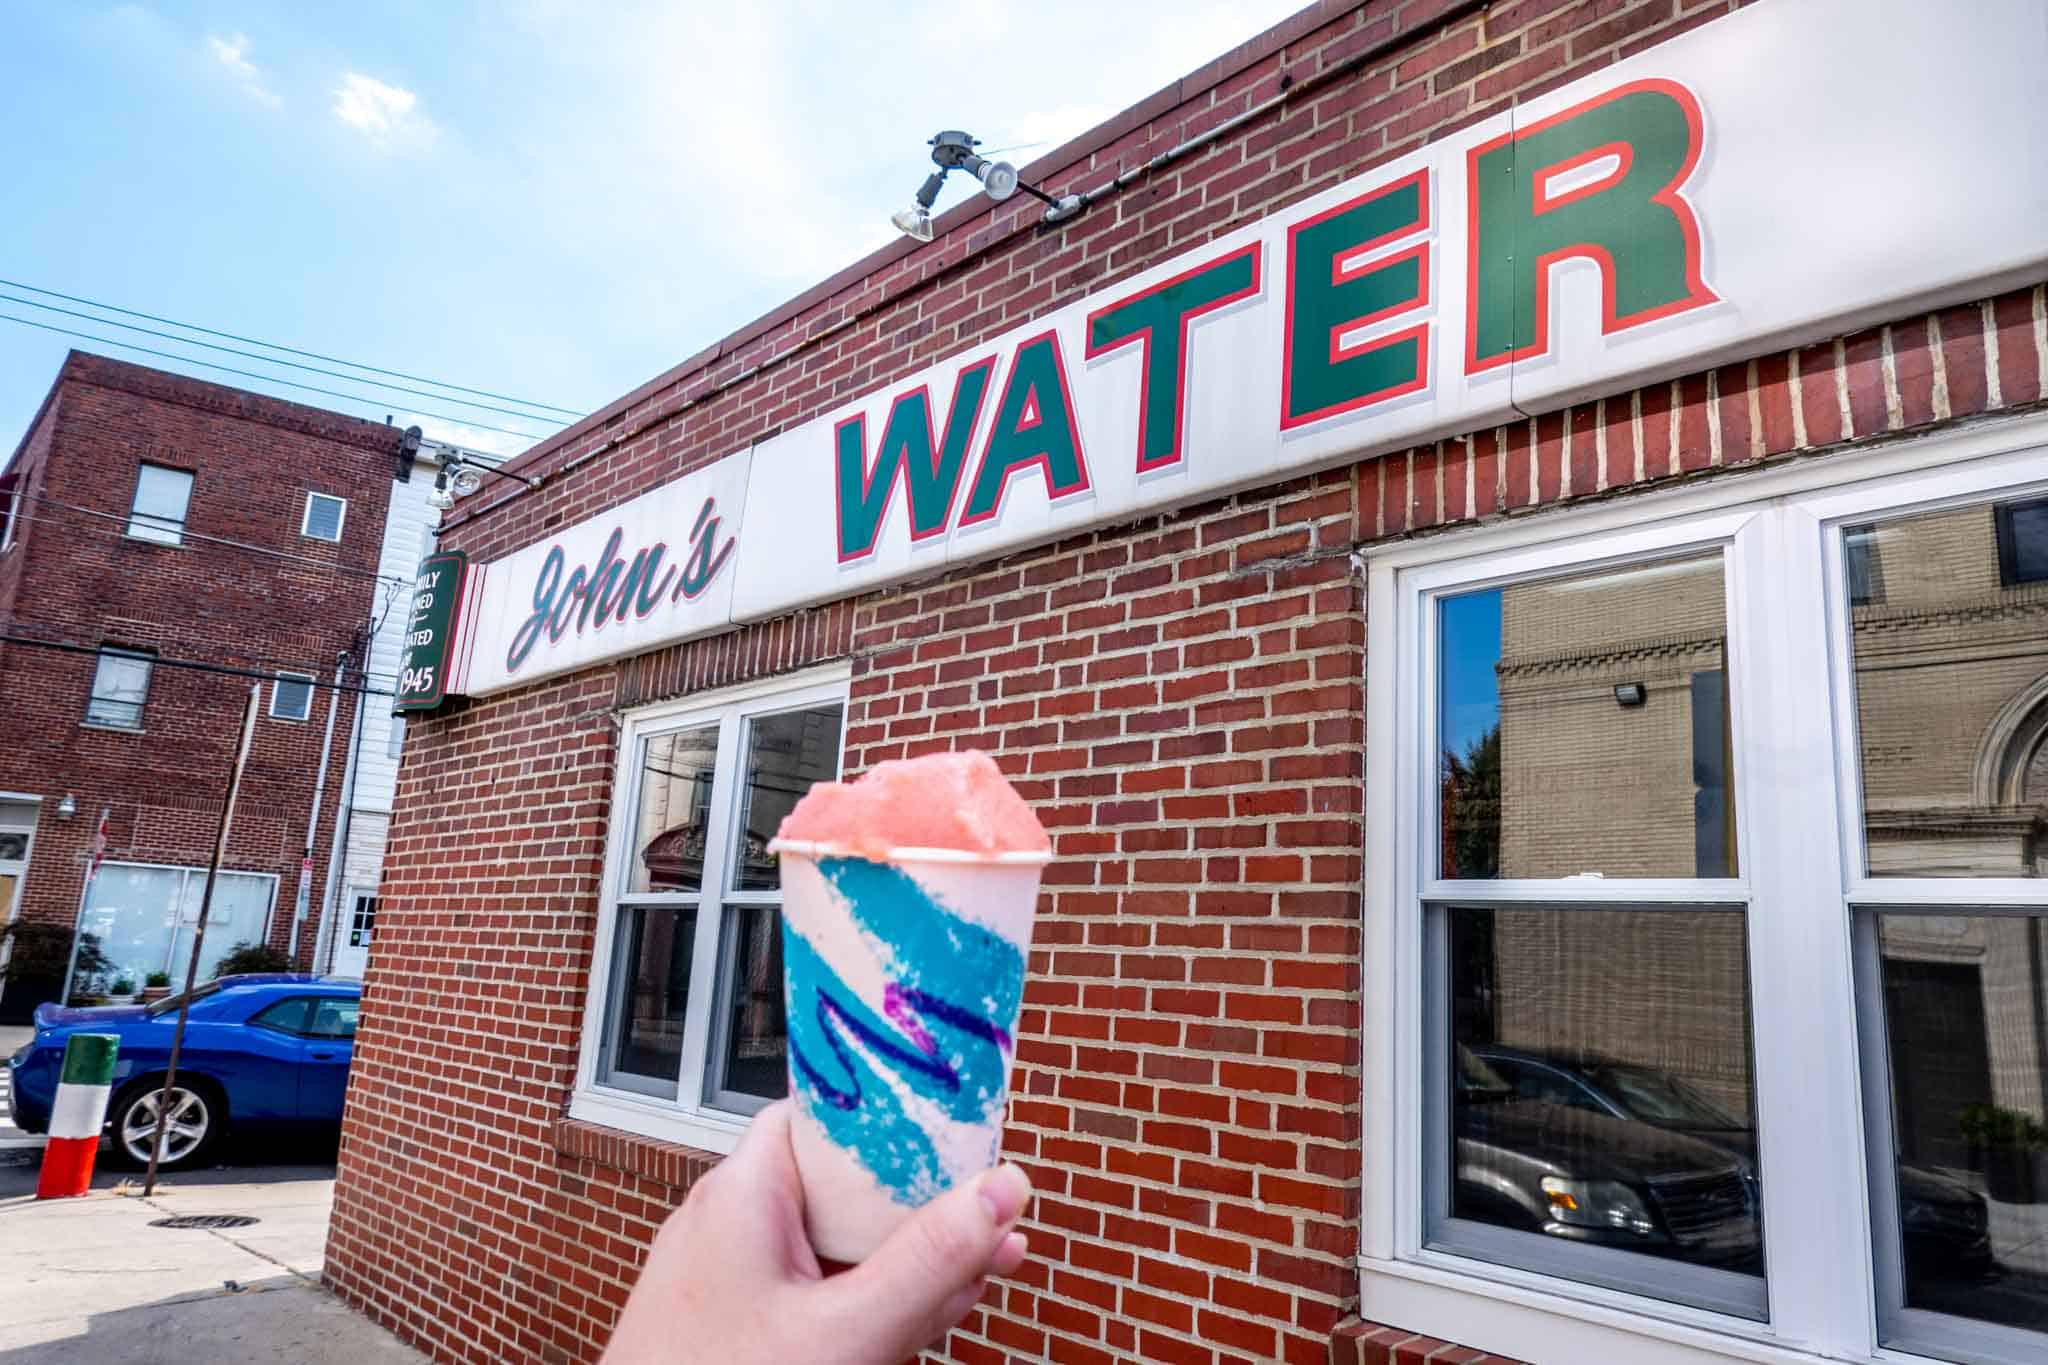 Water ice in paper cup in front of sign that says "John's Water"